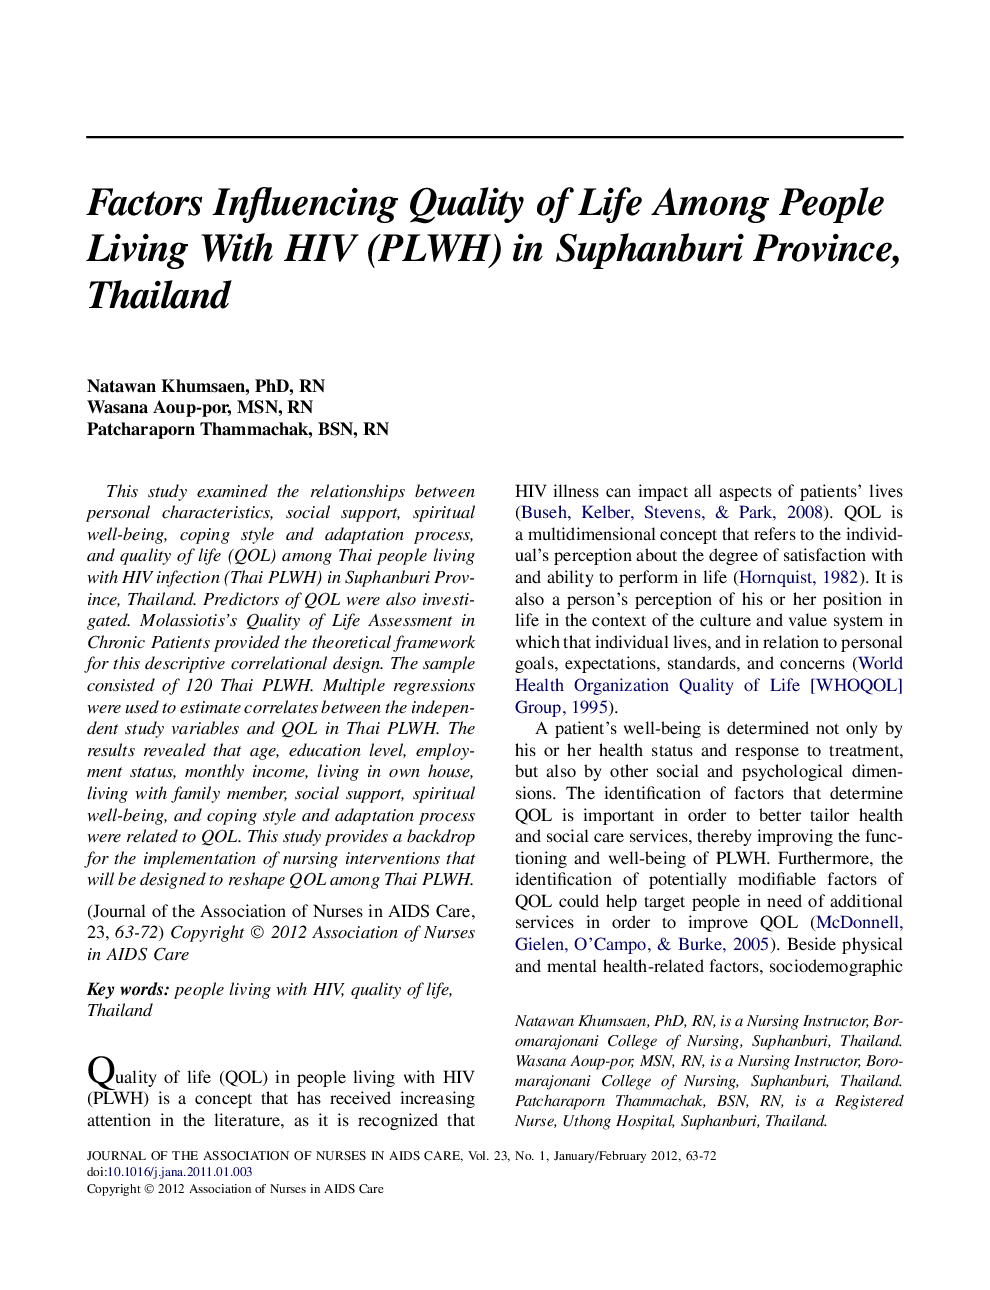 Factors Influencing Quality of Life Among People Living With HIV (PLWH) in Suphanburi Province, Thailand